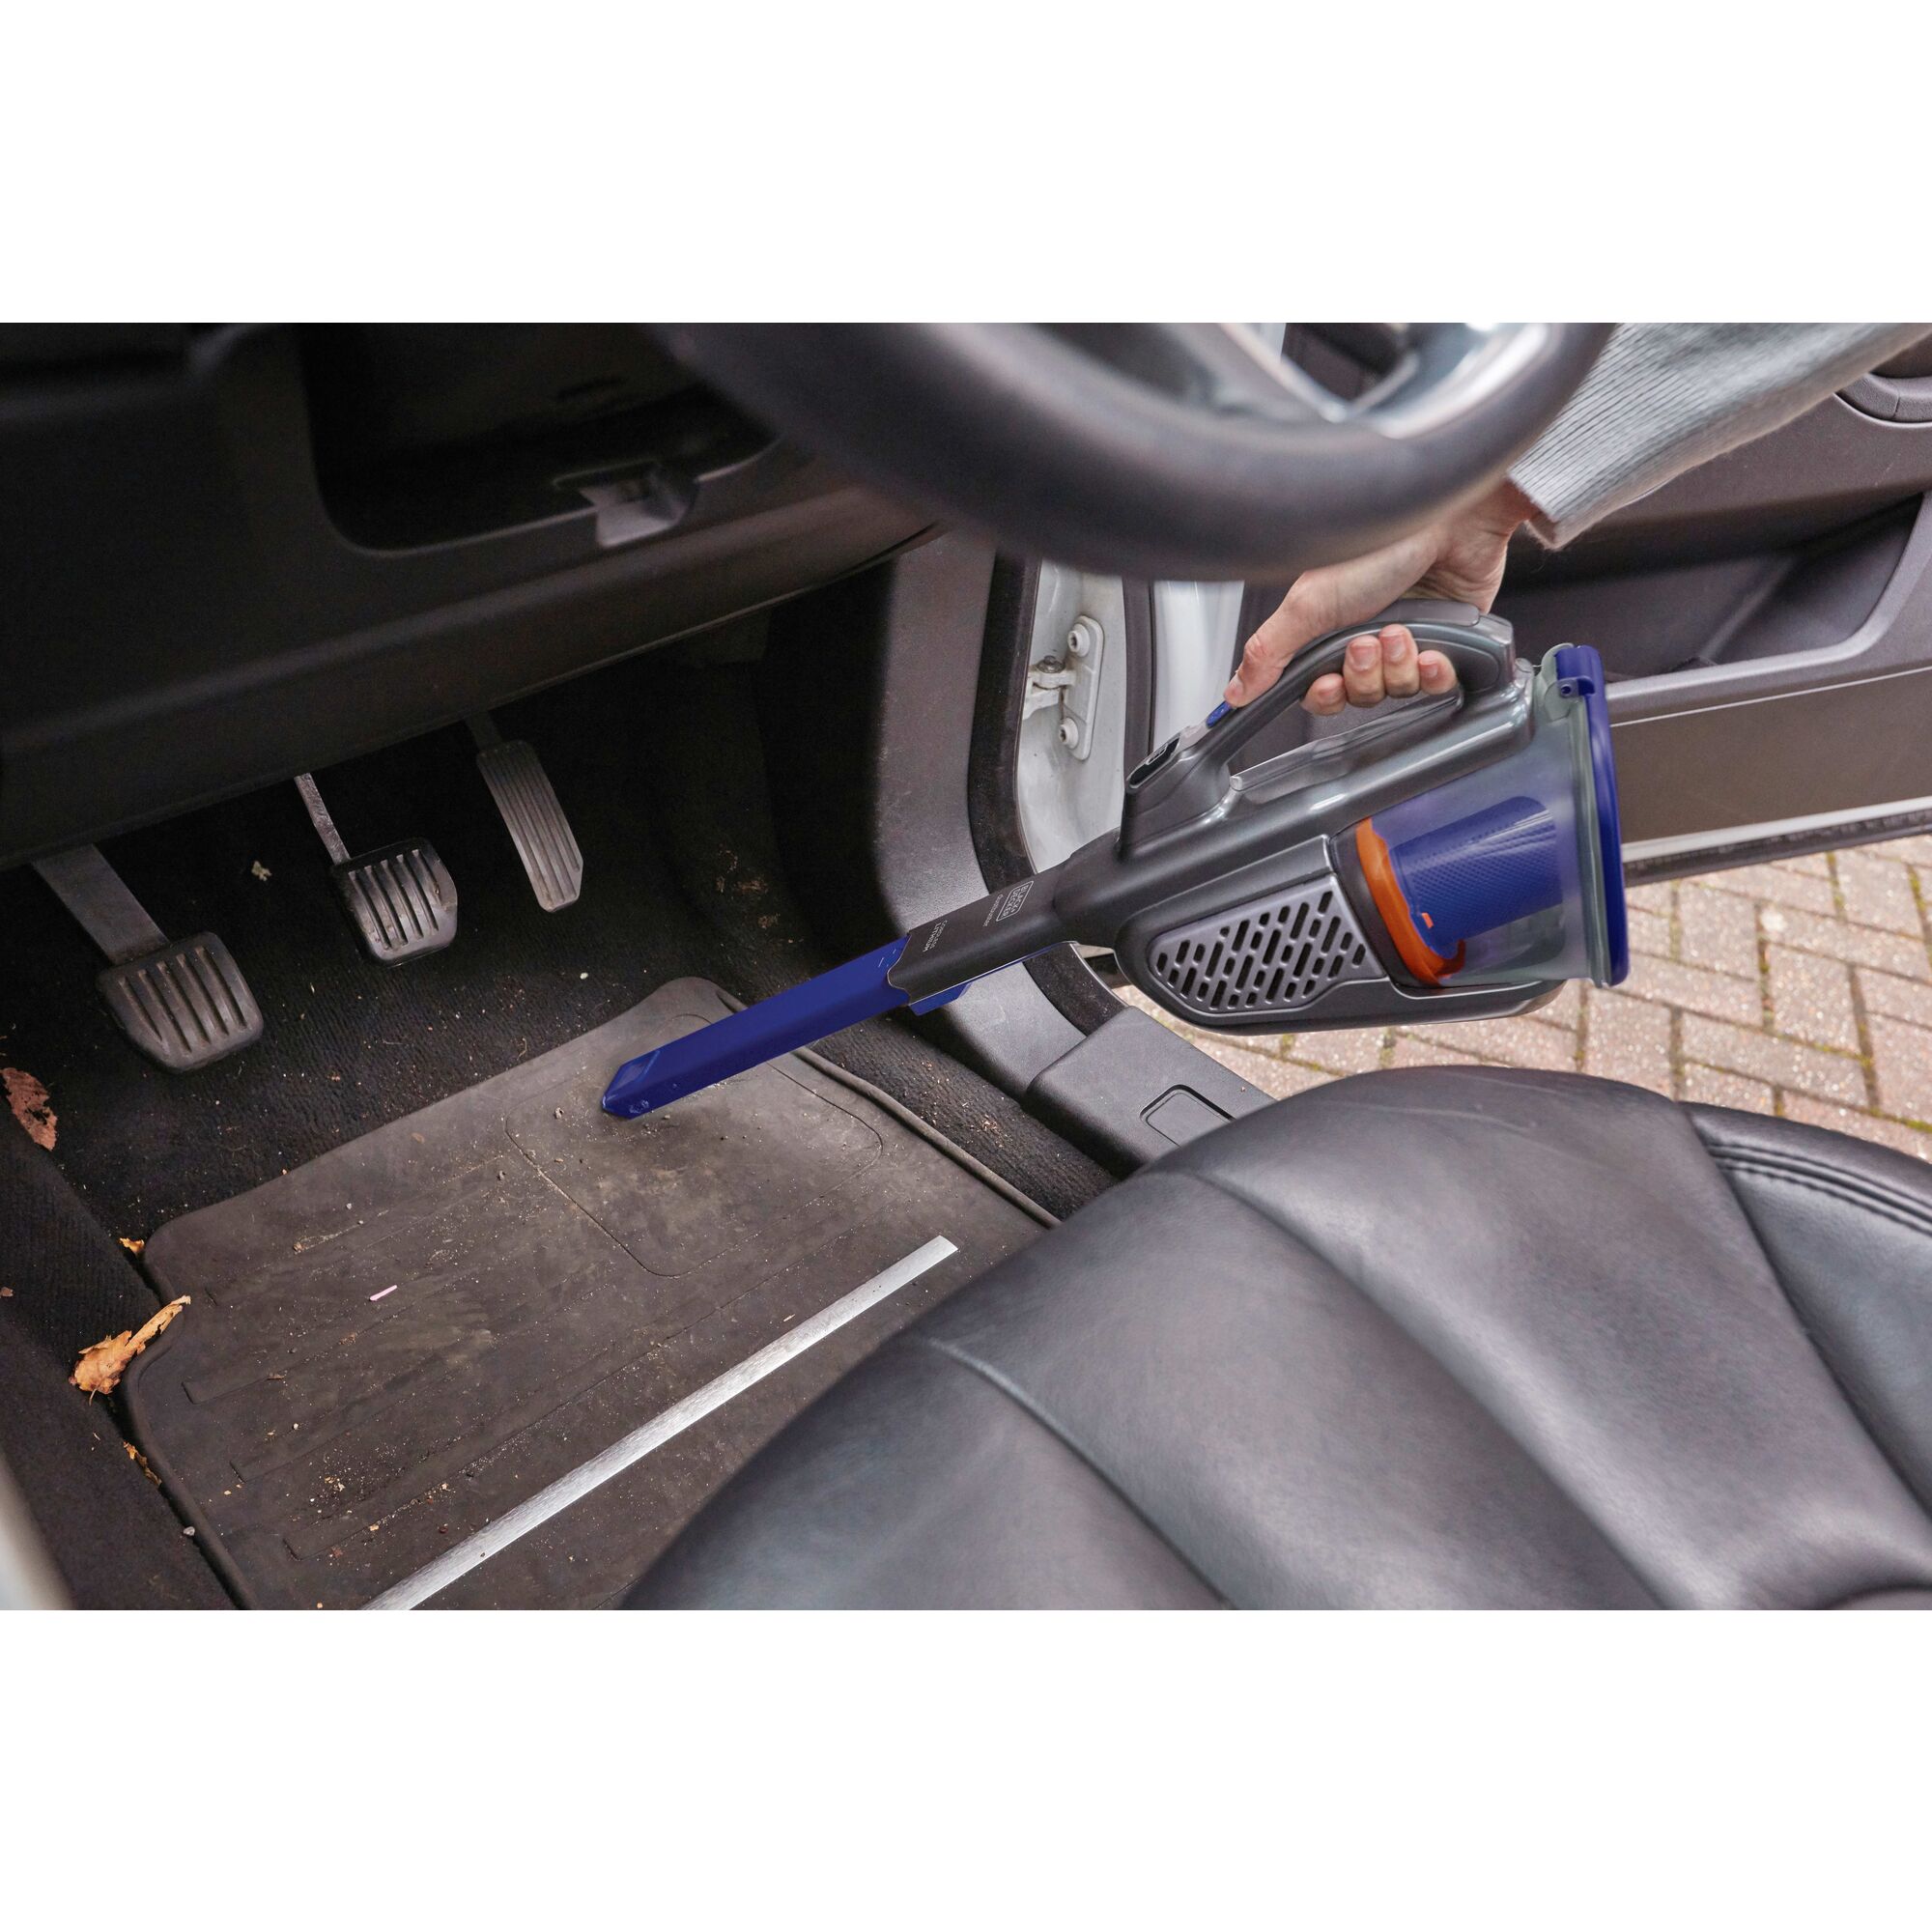 dustbuster Advanced Clean pet cordless hand vacuum being used to clean car mats.